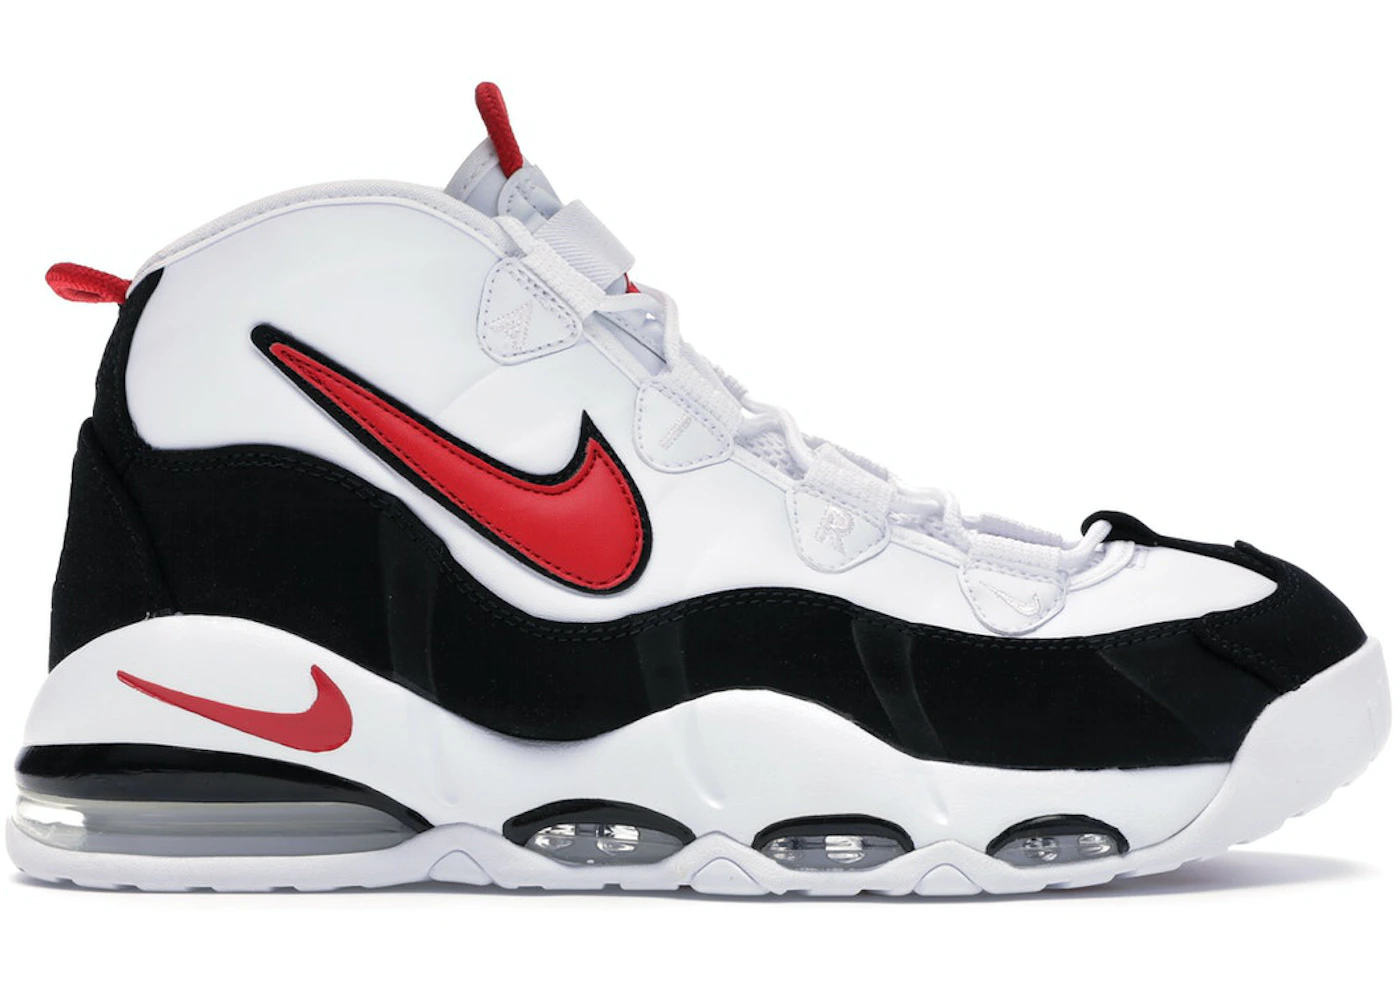 Nike Air Max Uptempo 95 White Red Black